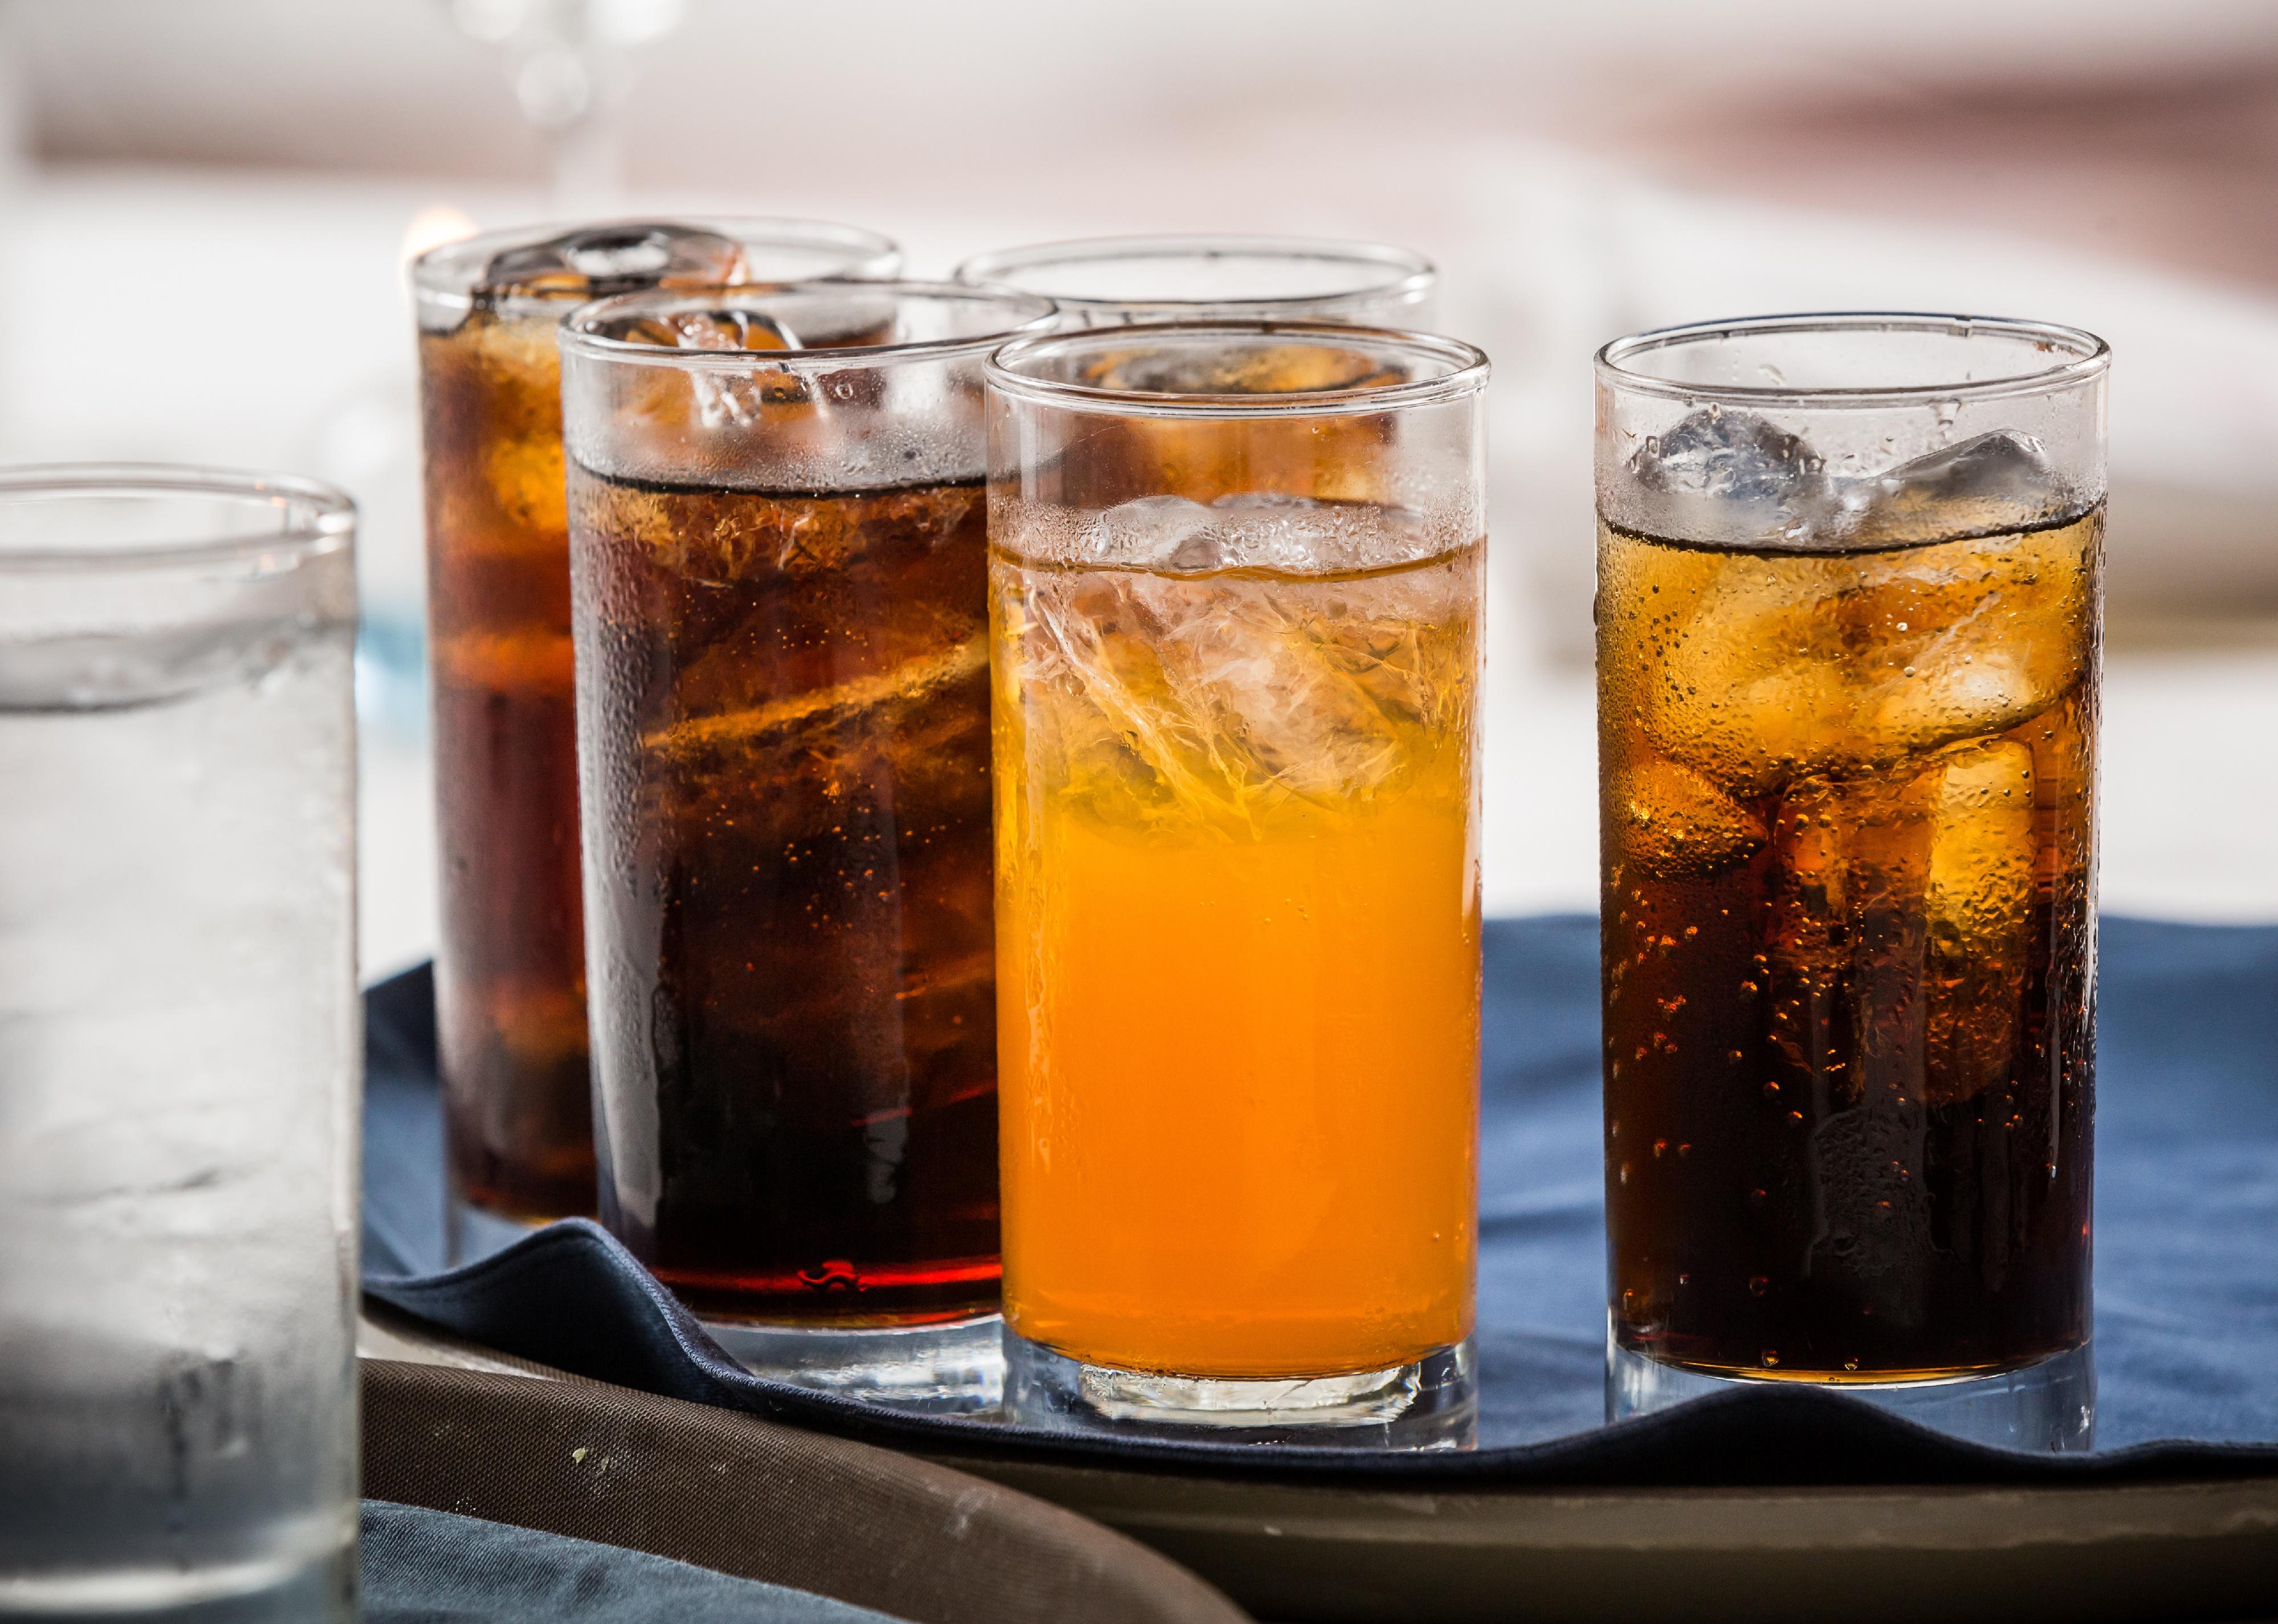 <p><a href="https://www.farmersalmanac.com/10-common-items-with-different-names-23742">Soft drinks</a> have some of the most varied terminology between regions. The drinks are most often referred to as "pop" in northern states, "tonic" in south Boston, "coke" in the southern states, and "soda," developed from "<a href="https://www.dictionary.com/e/soft-drink-soda-sodium/">soda water</a>" and named for the sodium salts dissolved in the drink, elsewhere. Coca-Cola, which was invented in Atlanta, became so popular in the area that Southerners began using coke as <a href="https://www.southernliving.com/culture/why-do-southerners-call-soda-coke">a generic name</a> for all soft drinks.</p>